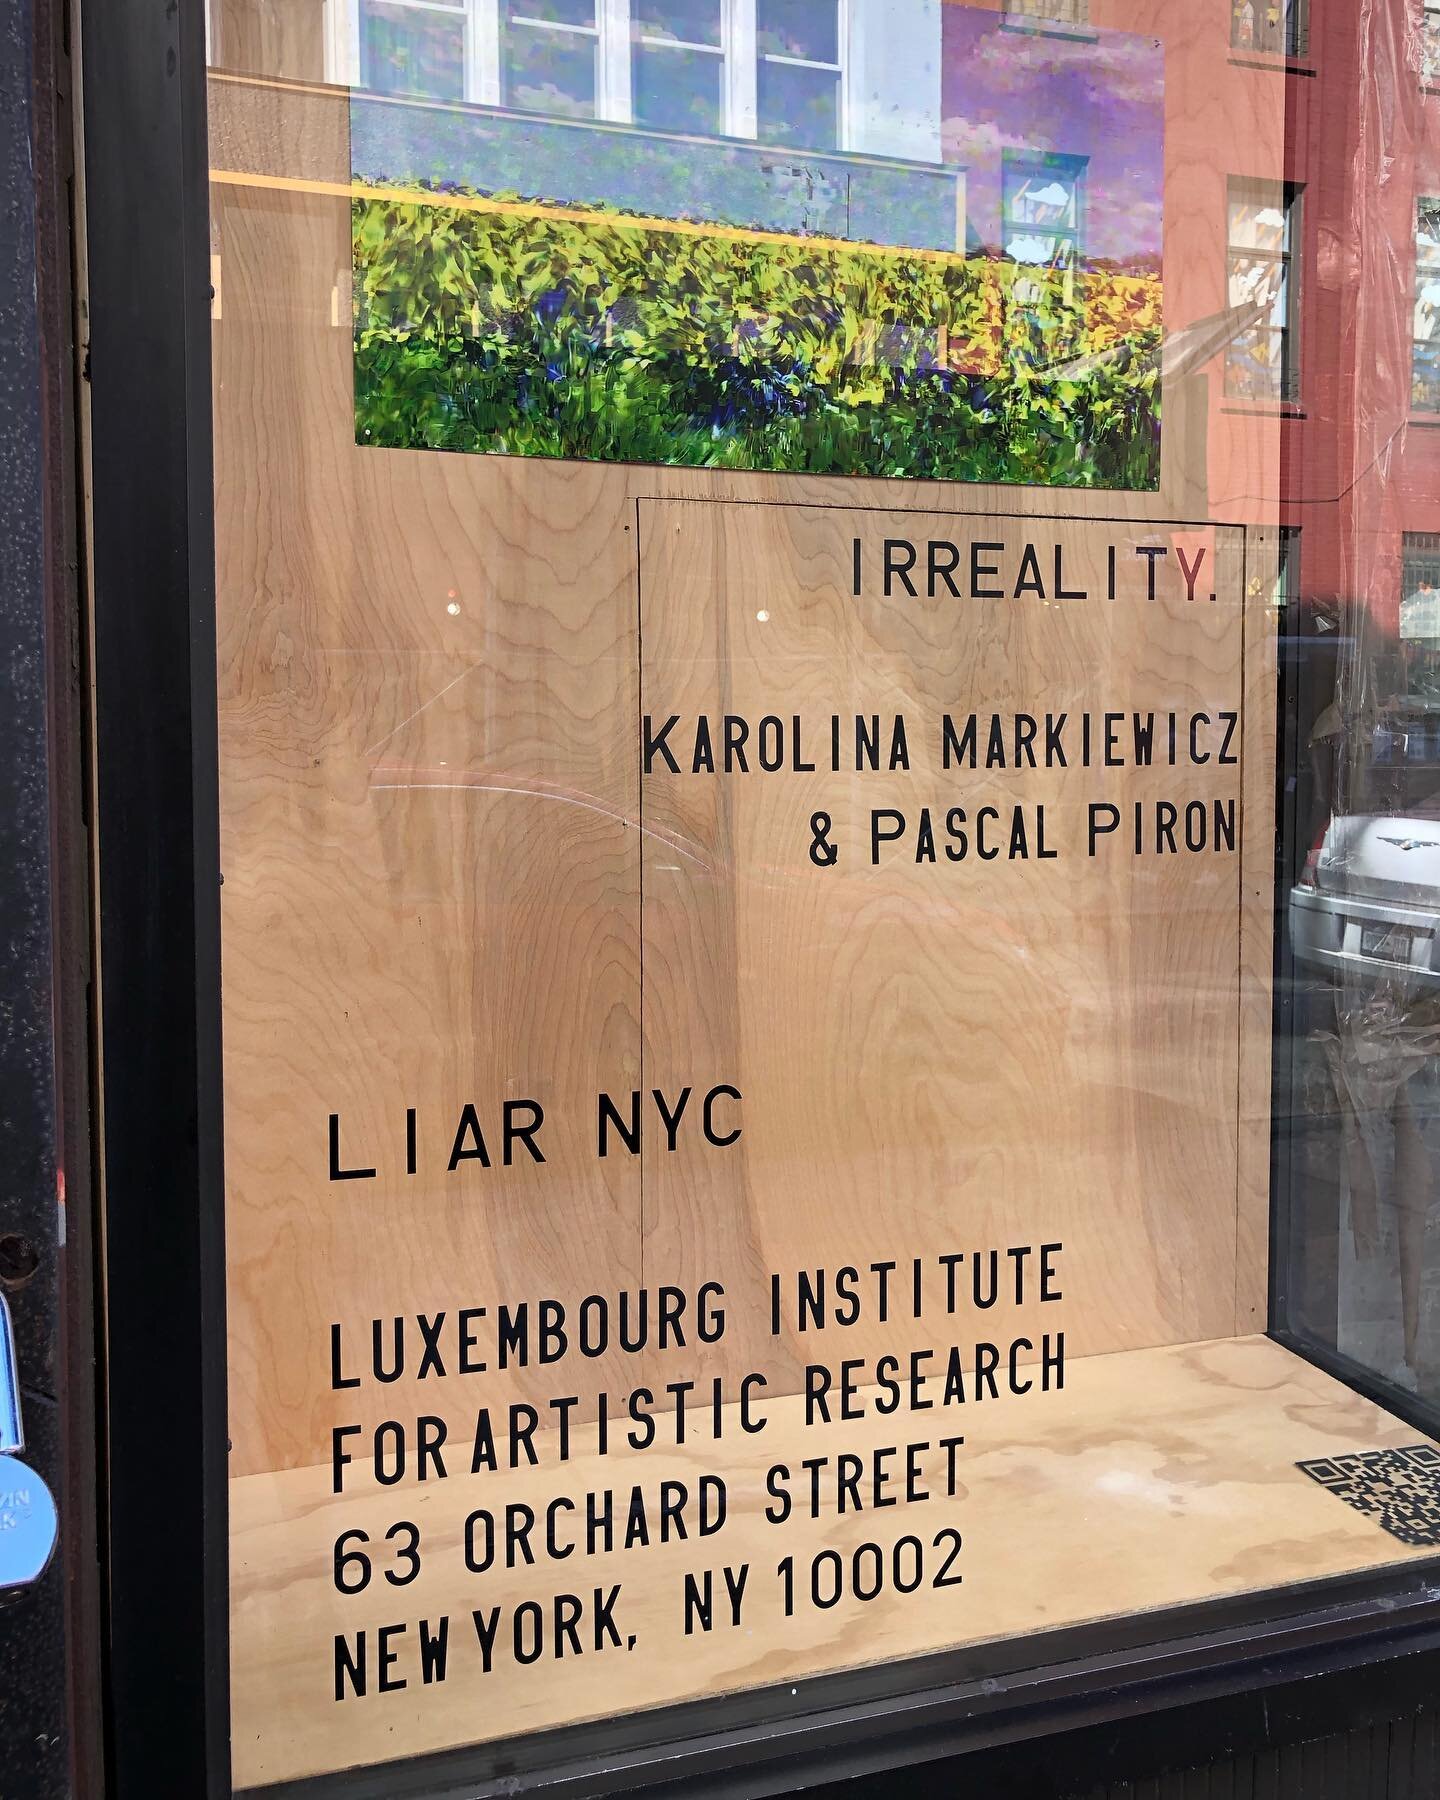 Pleased to share that the @karolinamarkiewiczpascalpiron show is extended until September 3rd! More info on the work 🌐liar-nyc.com🌐